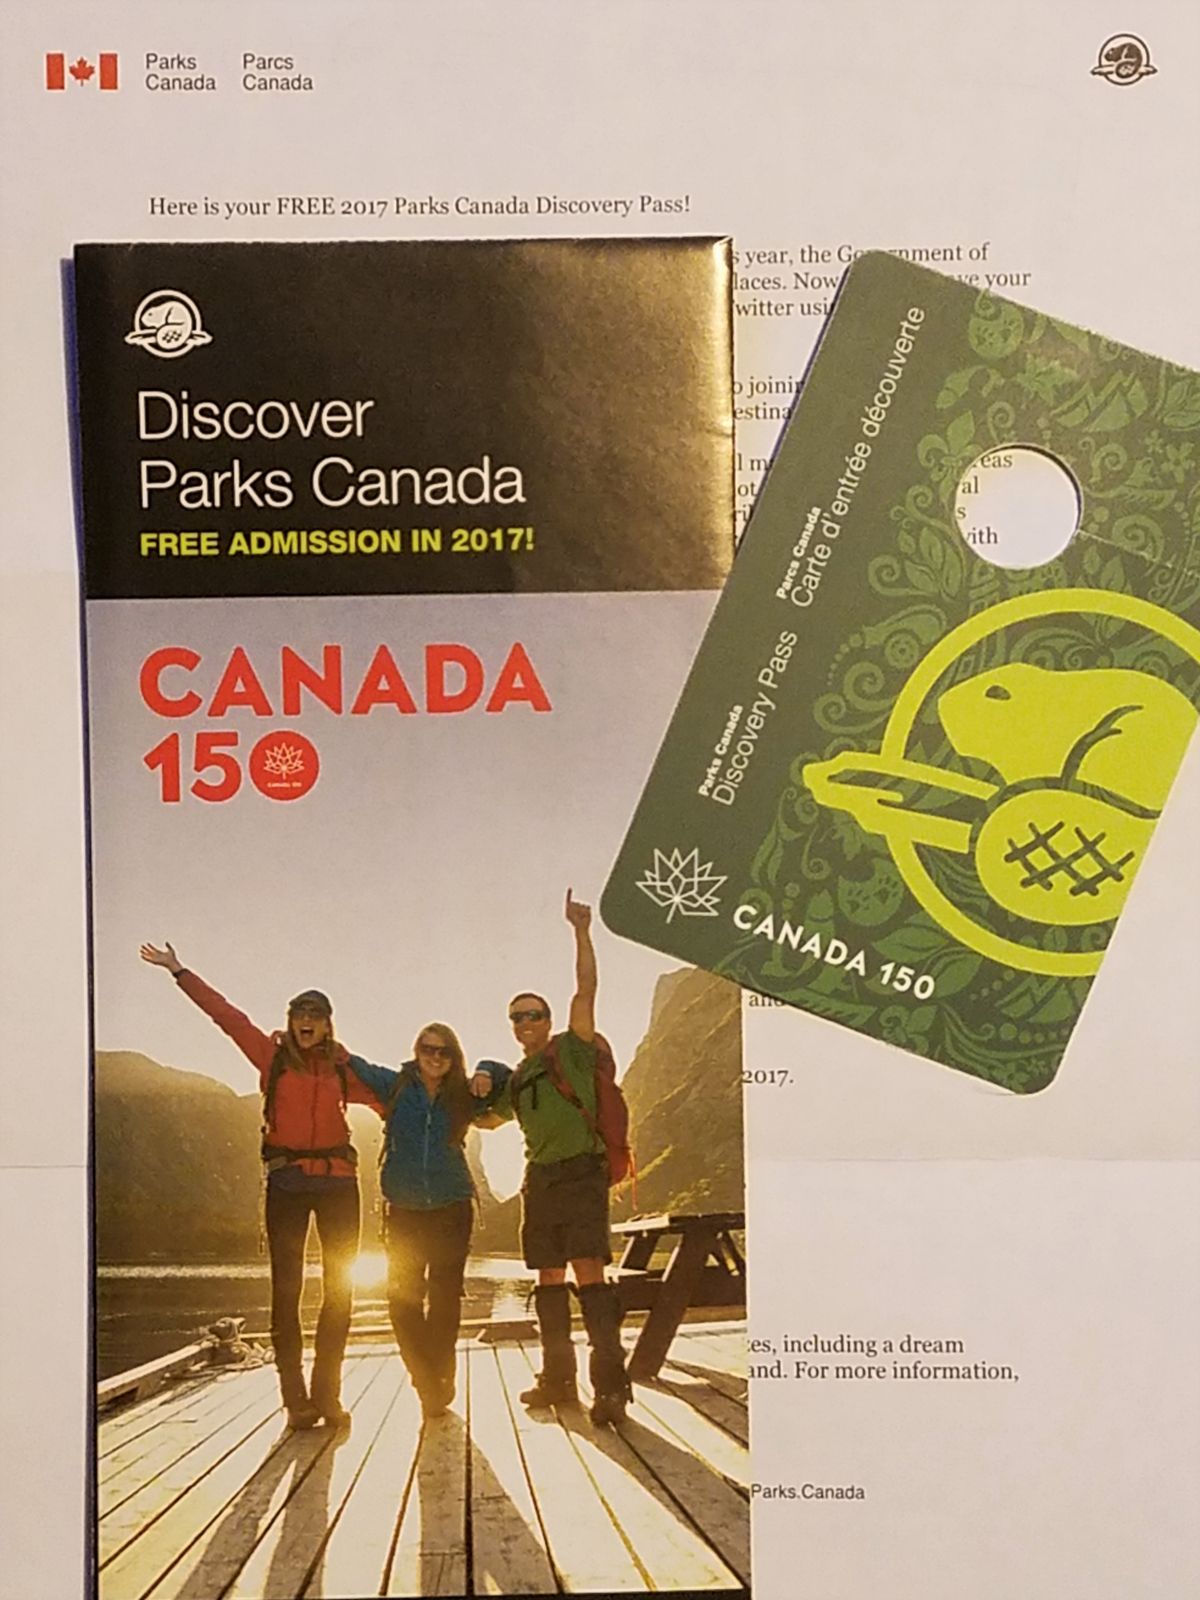 Canada celebrates 150th anniversary with free passes to busy national